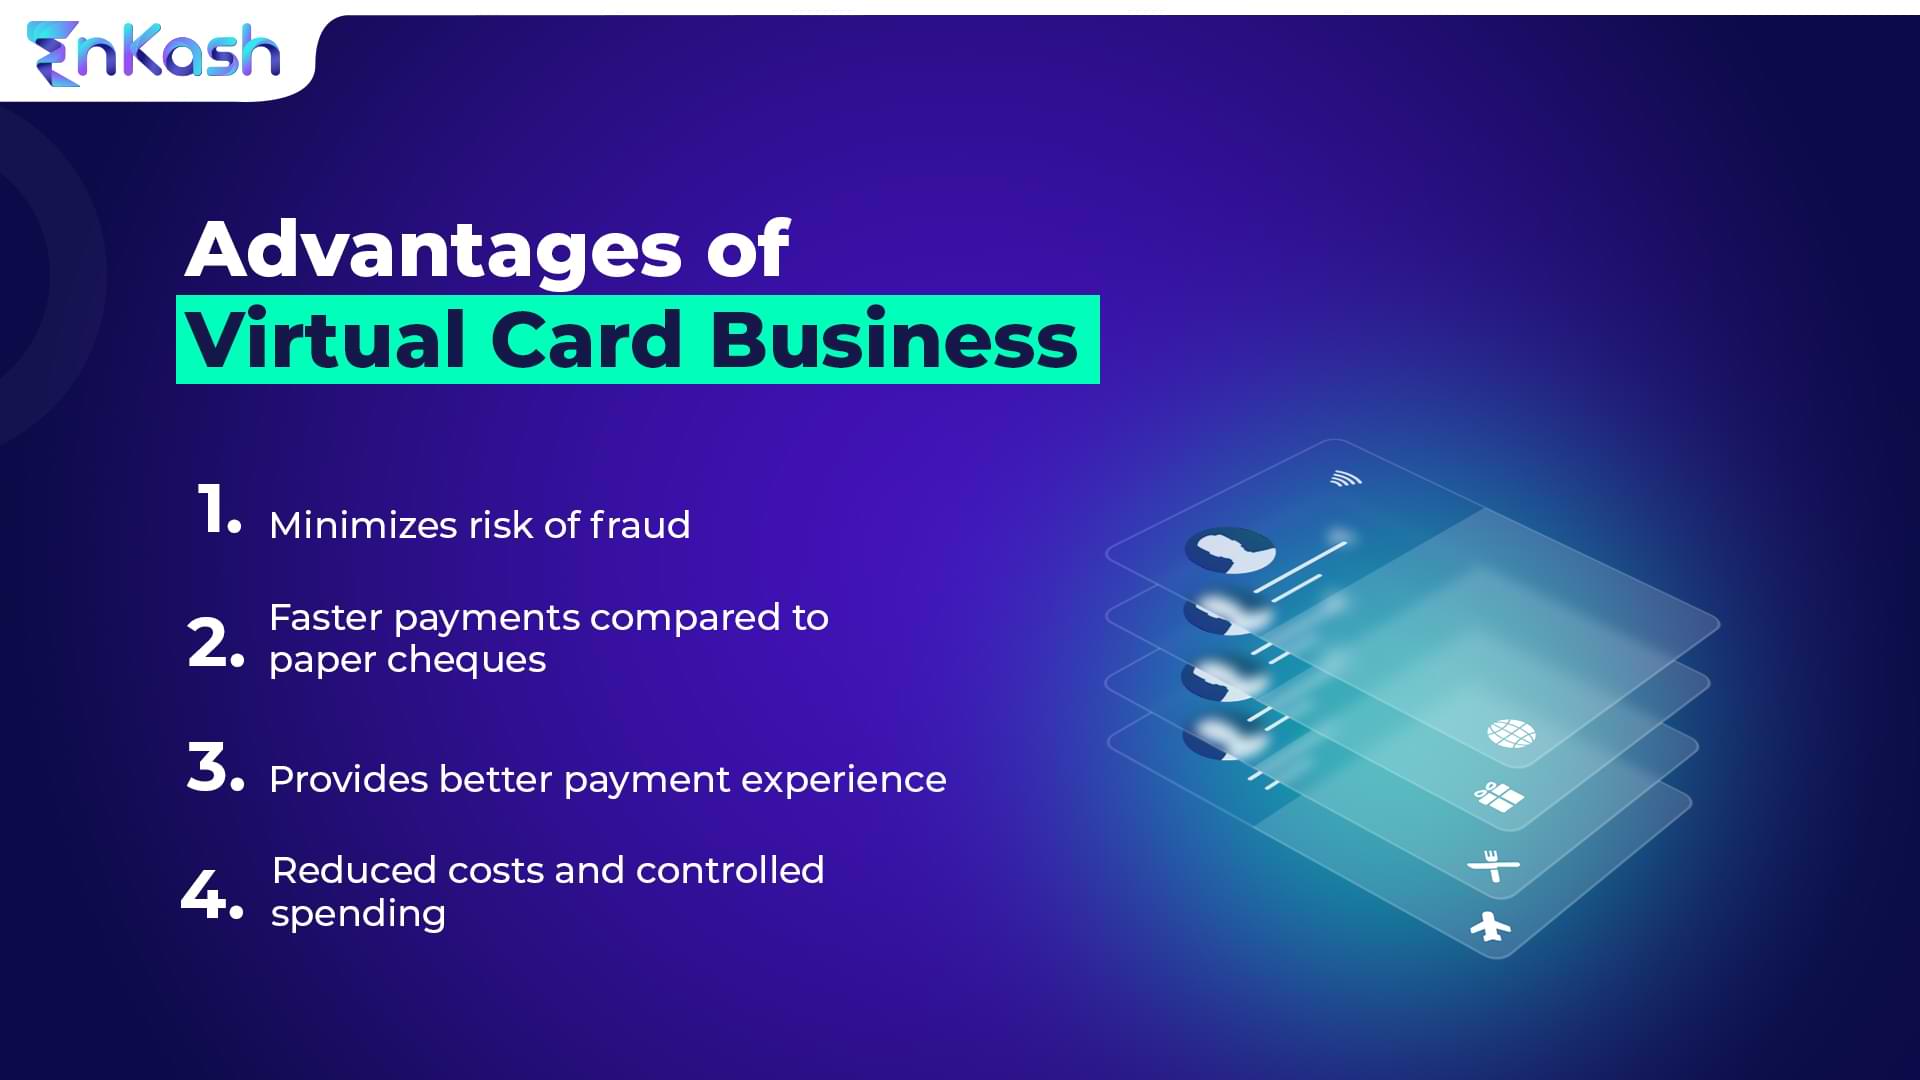 Advantages of virtual card business